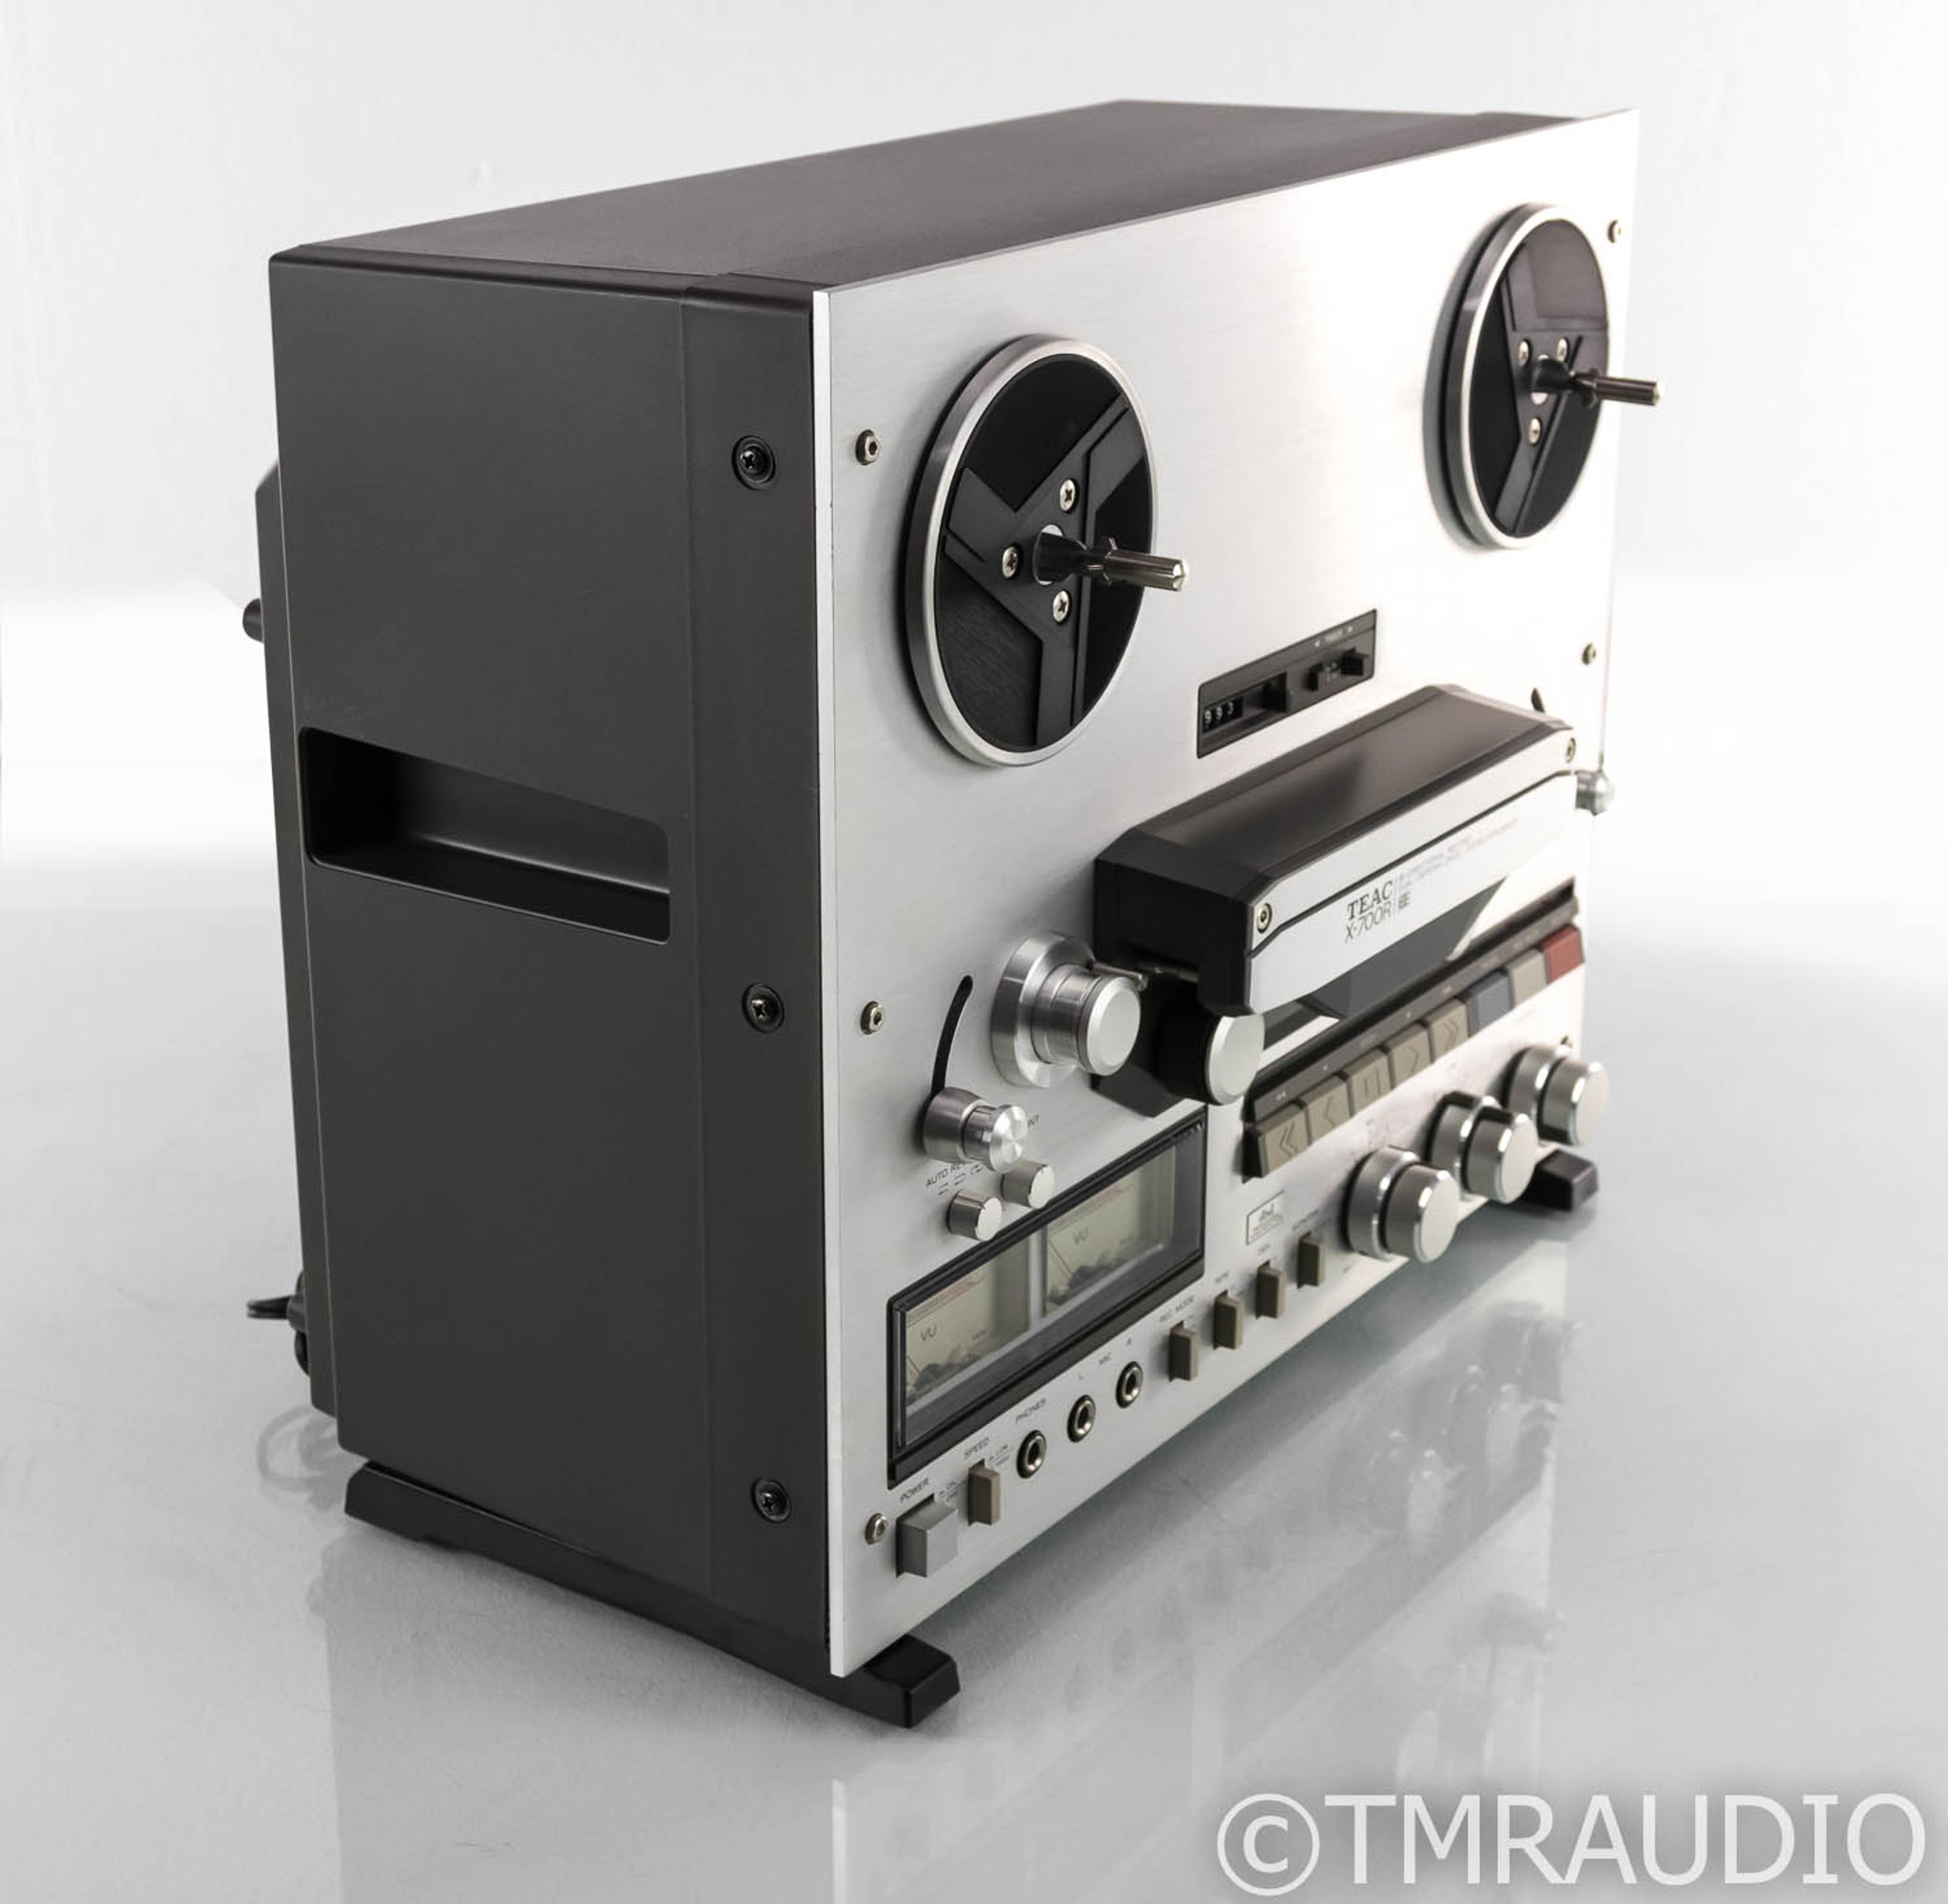 Teac X-700R Vintage Reel To Reel Tape Player; 2 Channel 1/4 Track